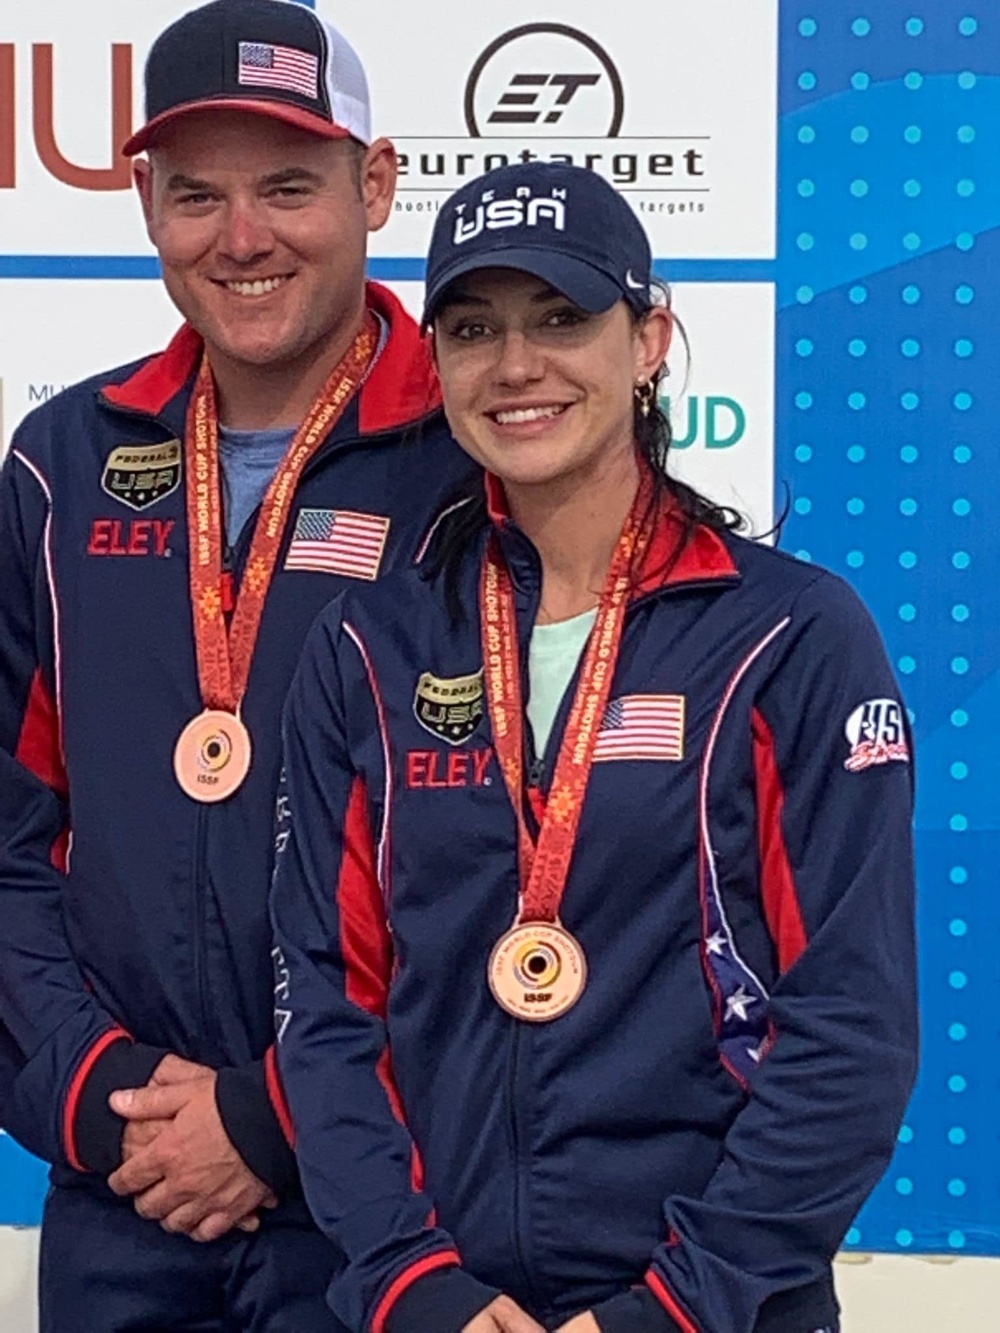 Soldier Wins World Cup Bronze Medal in Mixed Trap Team